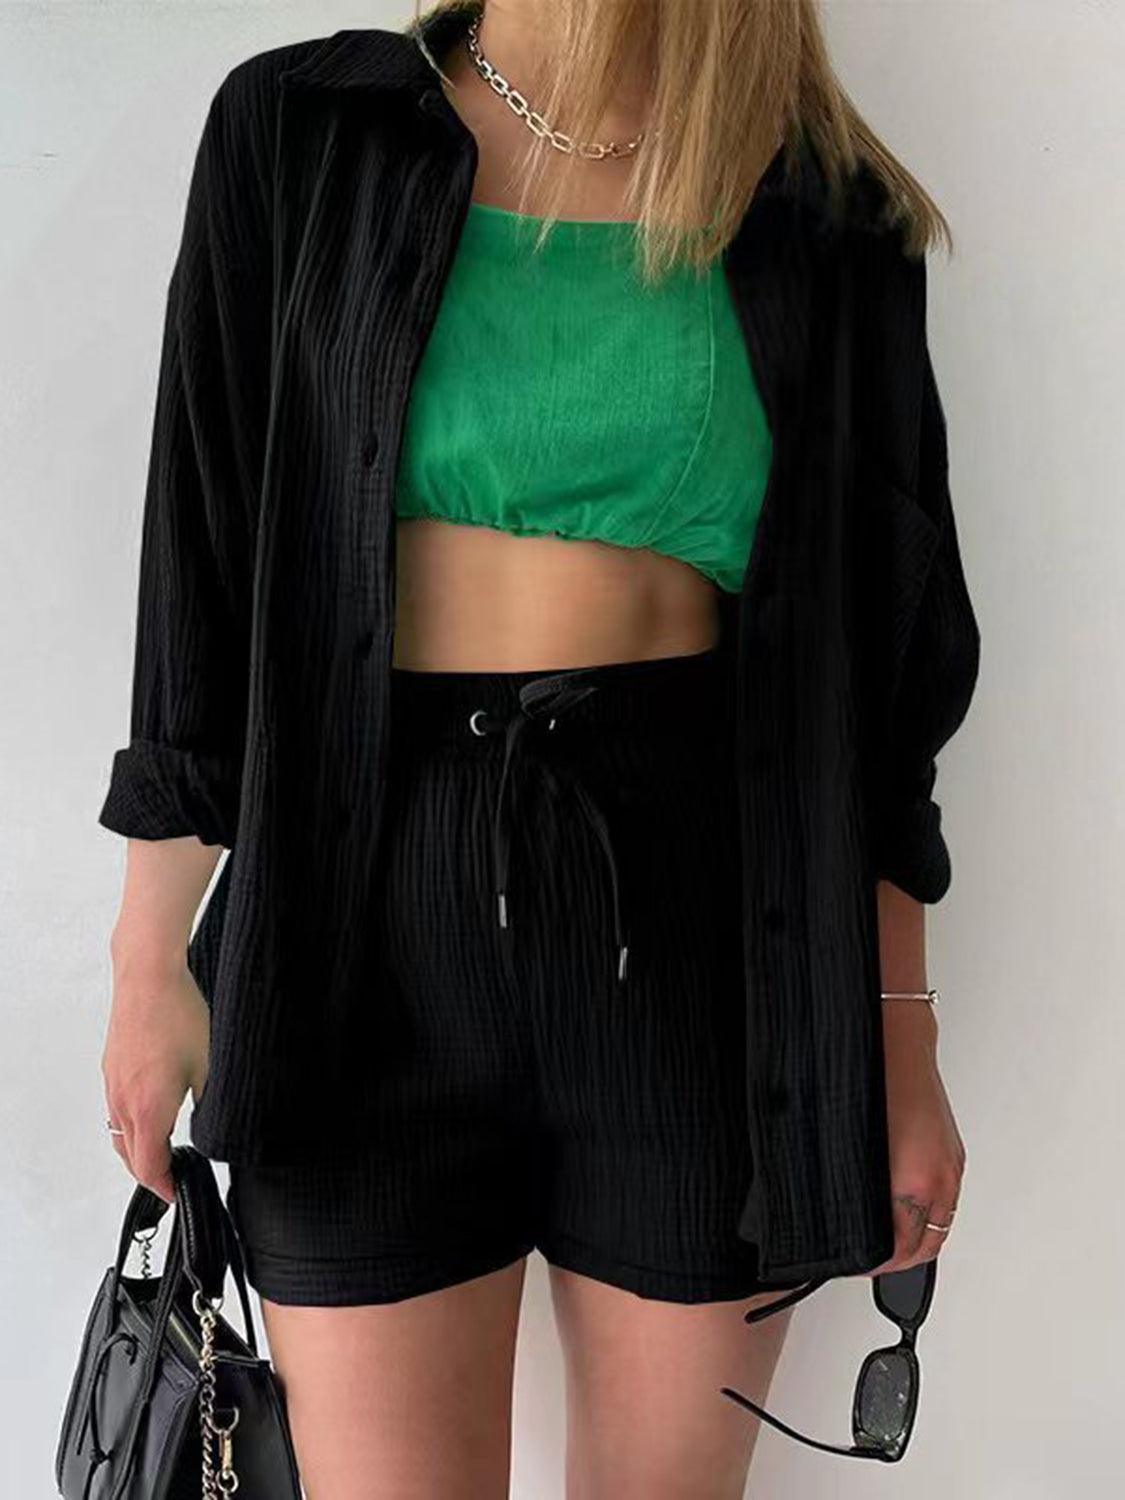 a woman wearing a green crop top and black shorts